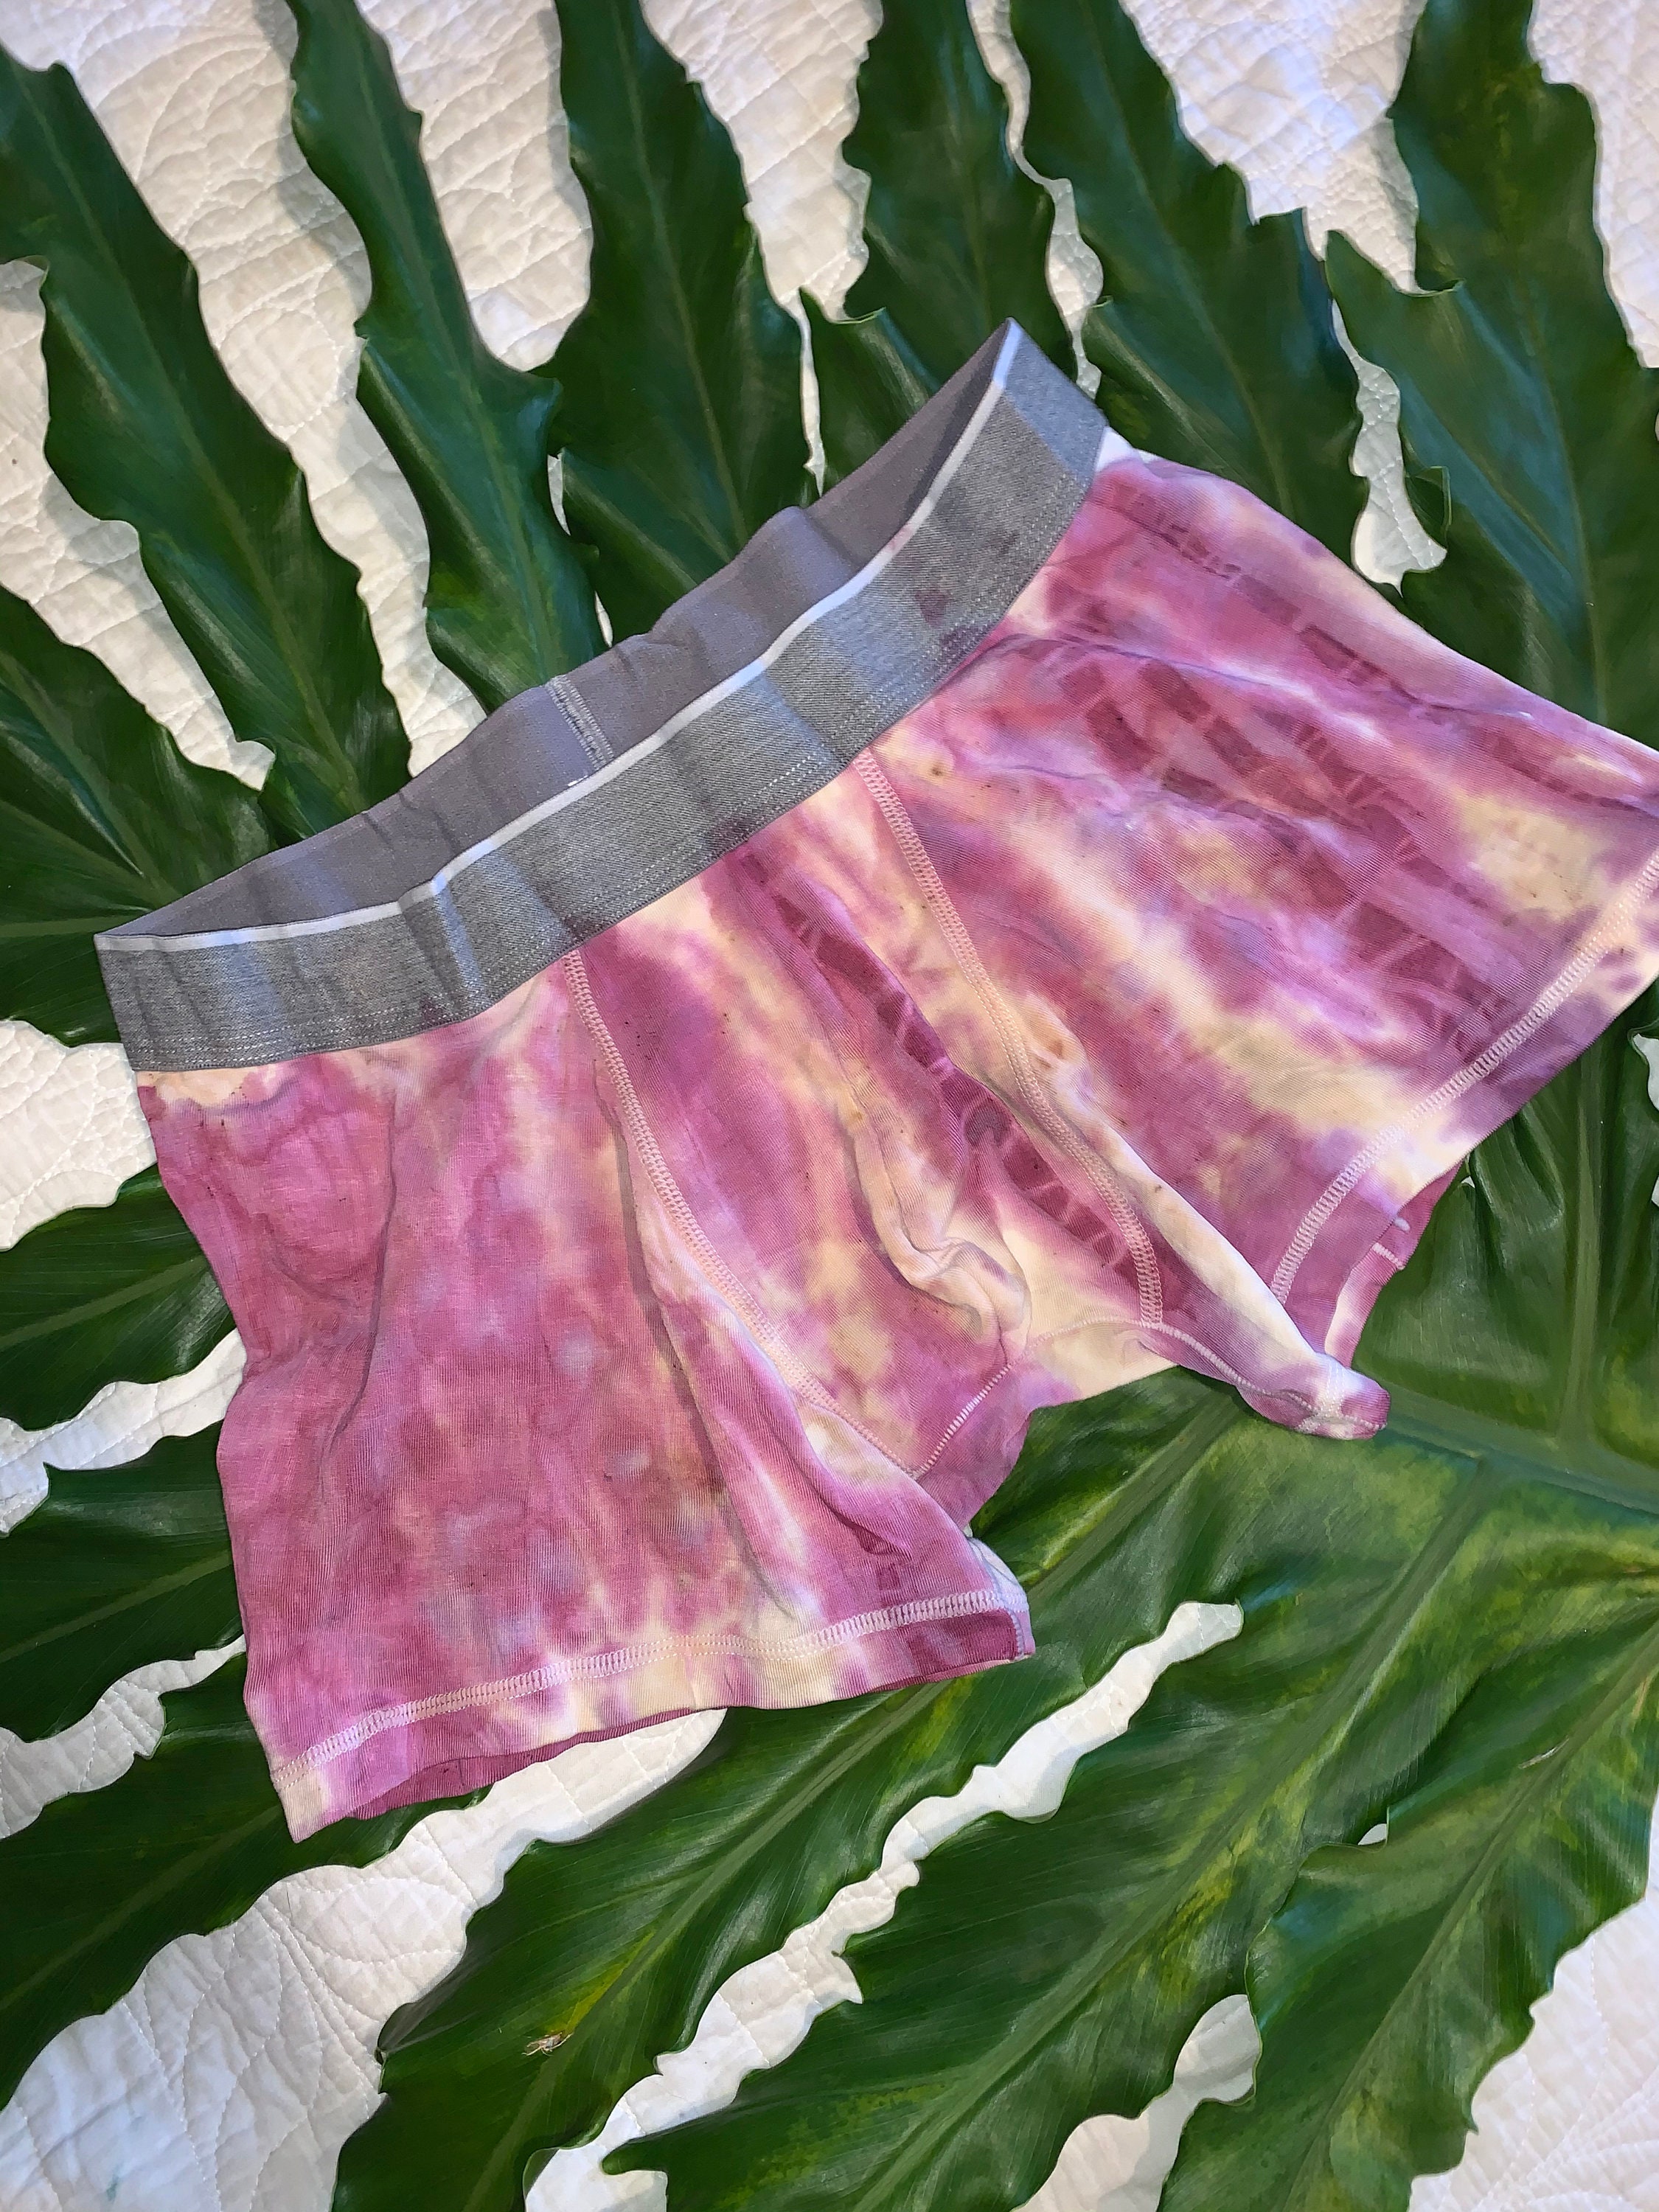 Magical Plant Dyed High-waist Panties Dyed With Avocado, Beet, Spinach,  Blueberry, Turmeric, Wildcrafted Flowers 